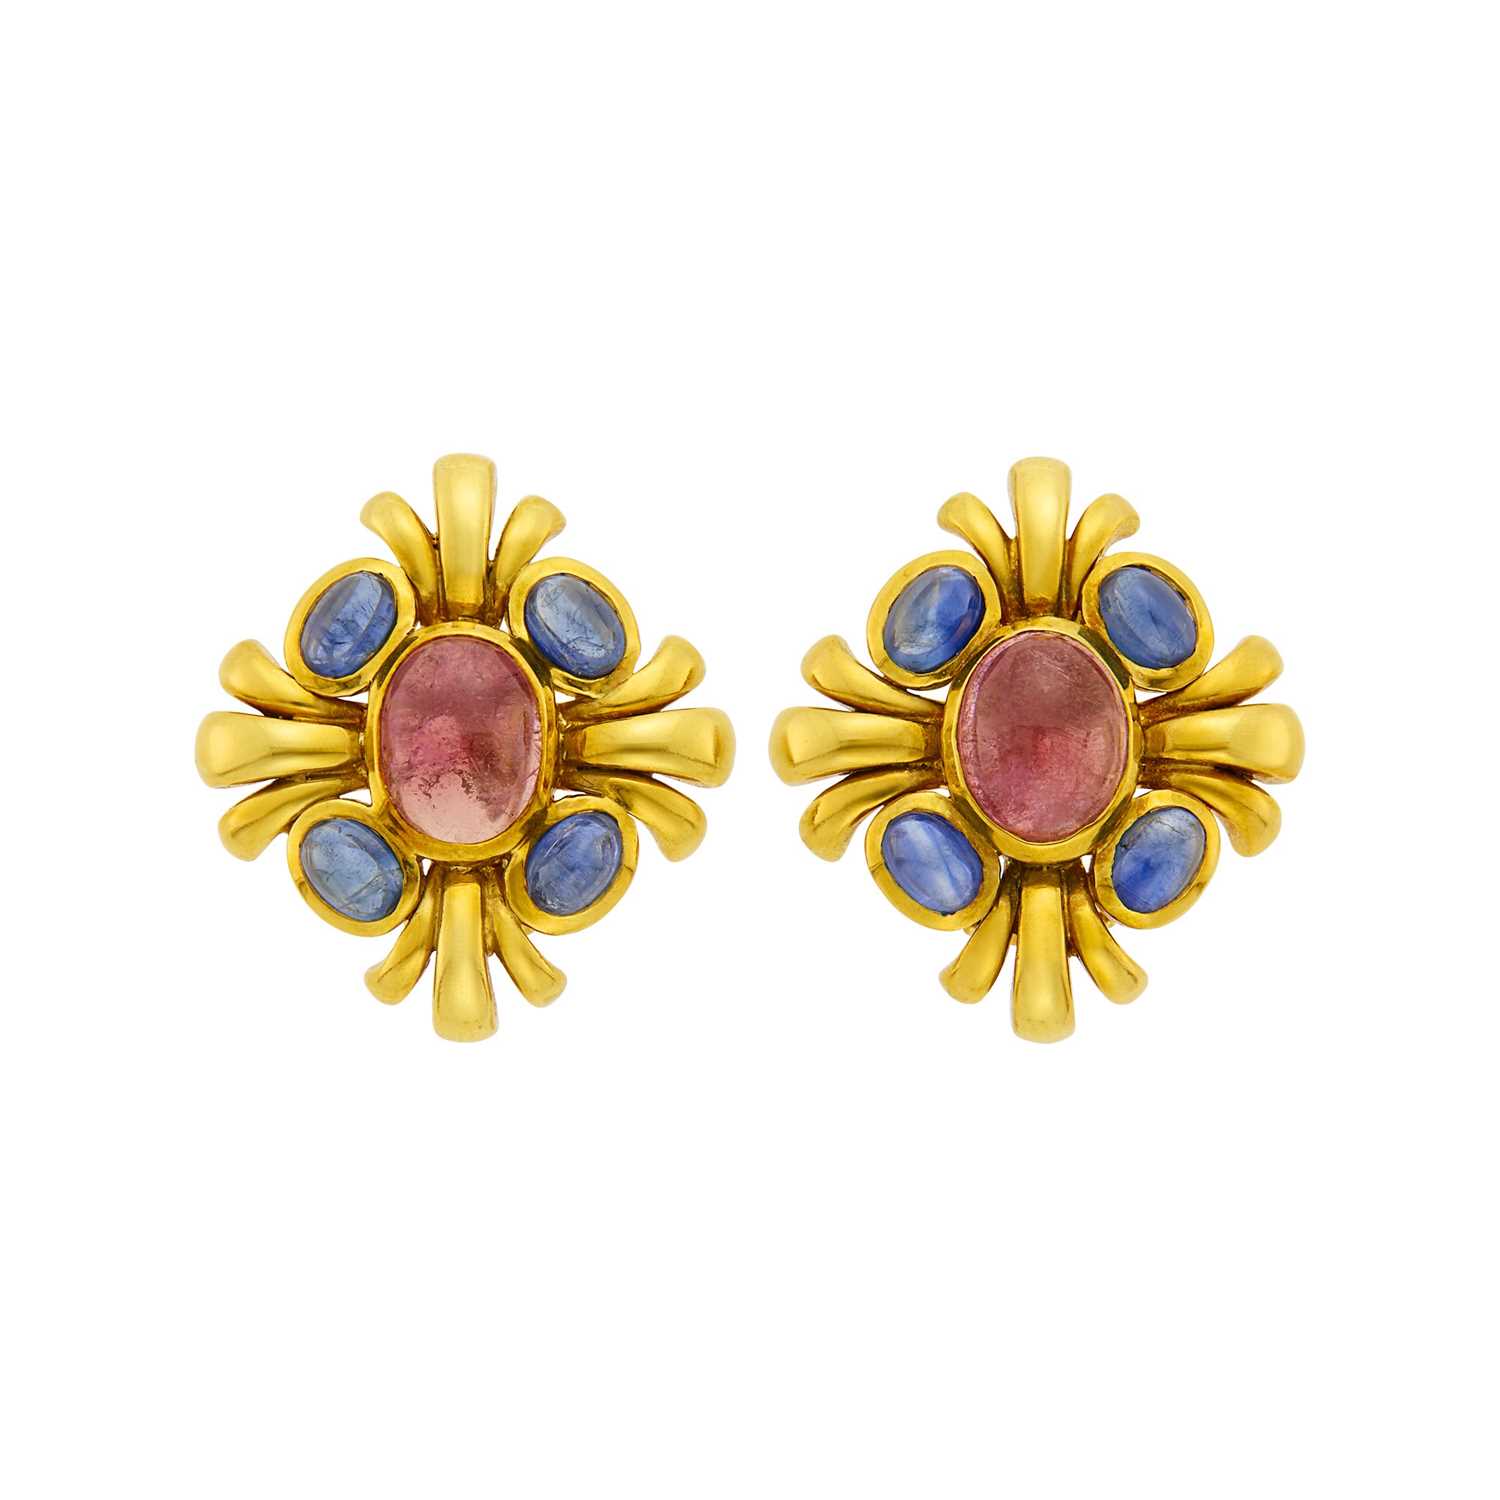 Lot 1110 - Pair of Gold, Cabochon Pink Tourmaline and Sapphire Earclips